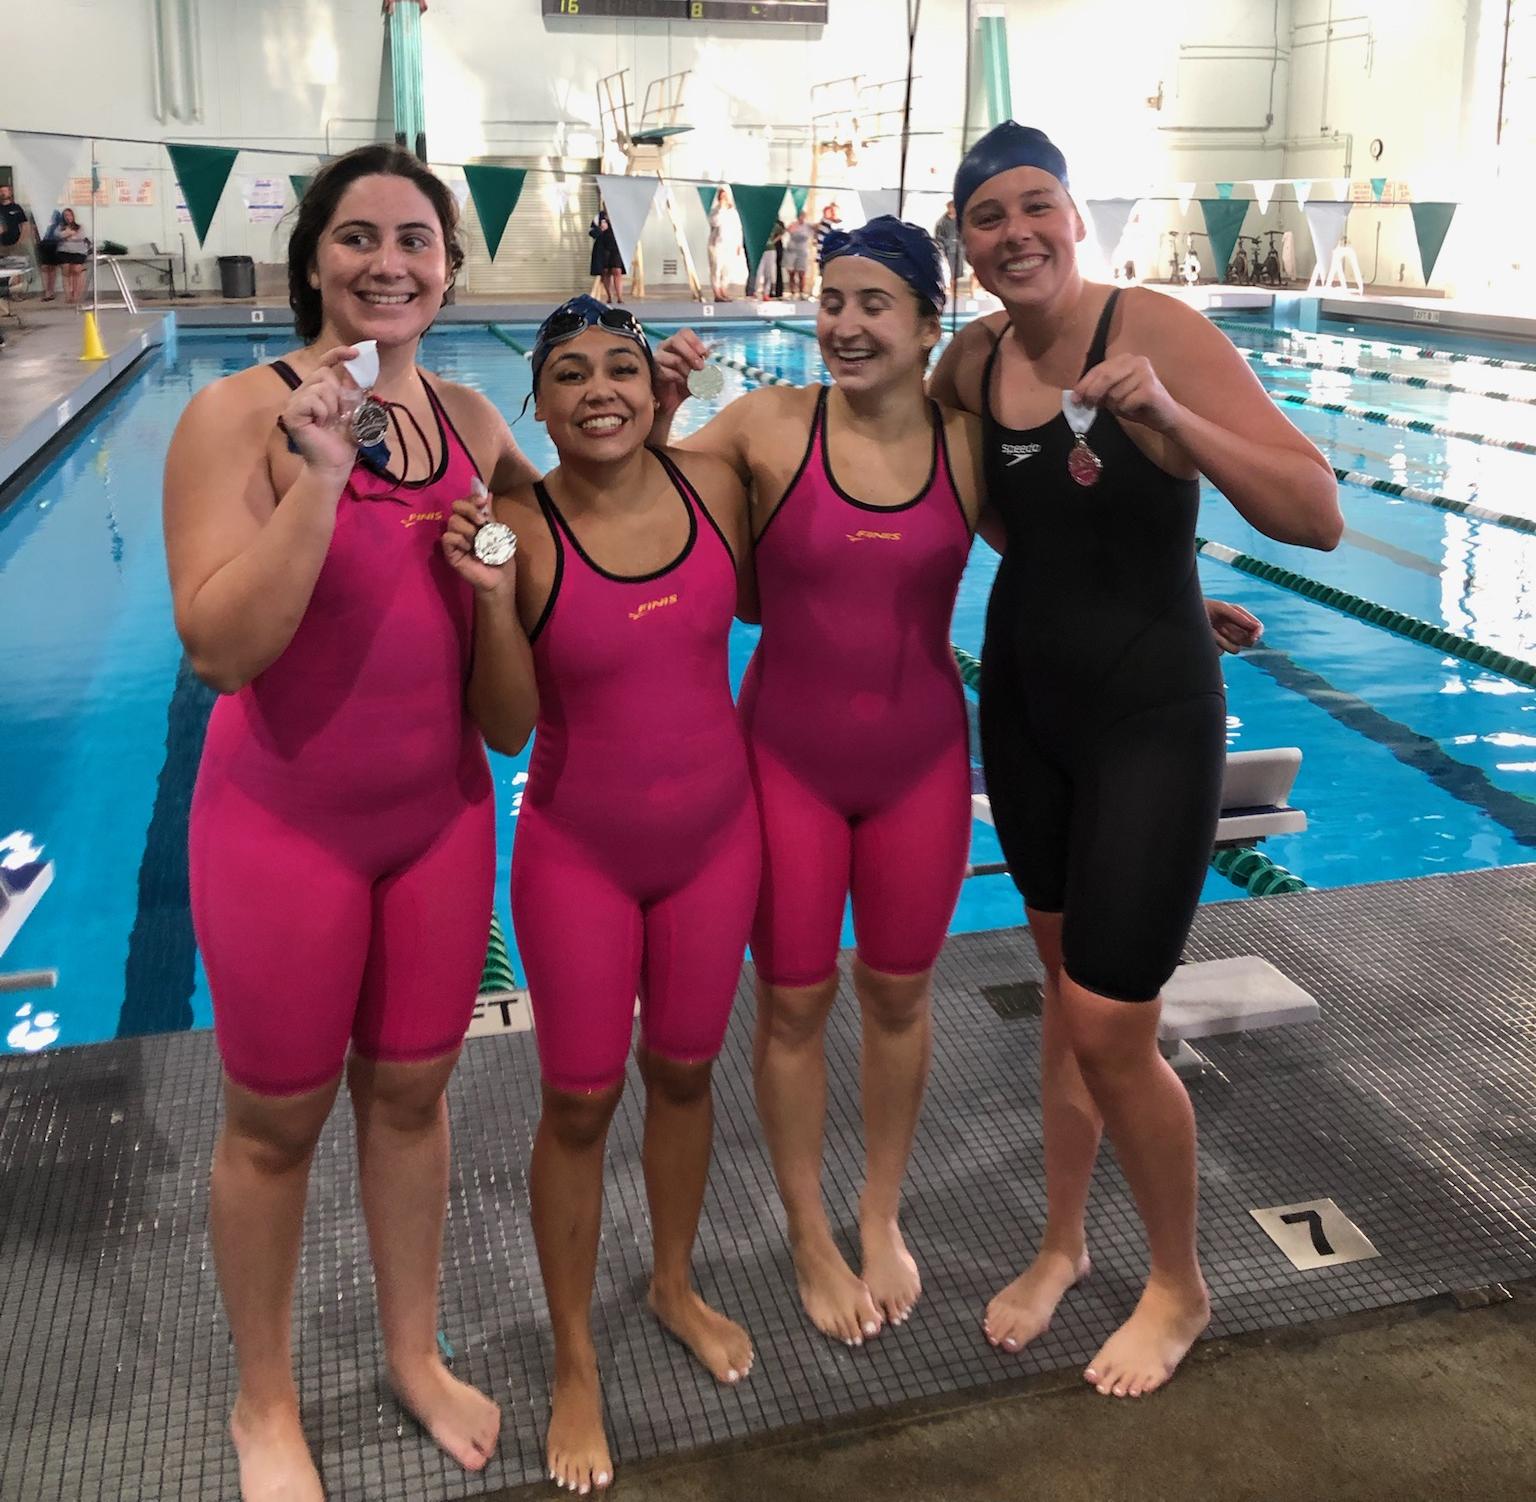 (L-R) The 400-yard freestyle relay team of Jillian Crockett, Karina Oliveros, Isabella Berdote and Samantha Wisher came in third place